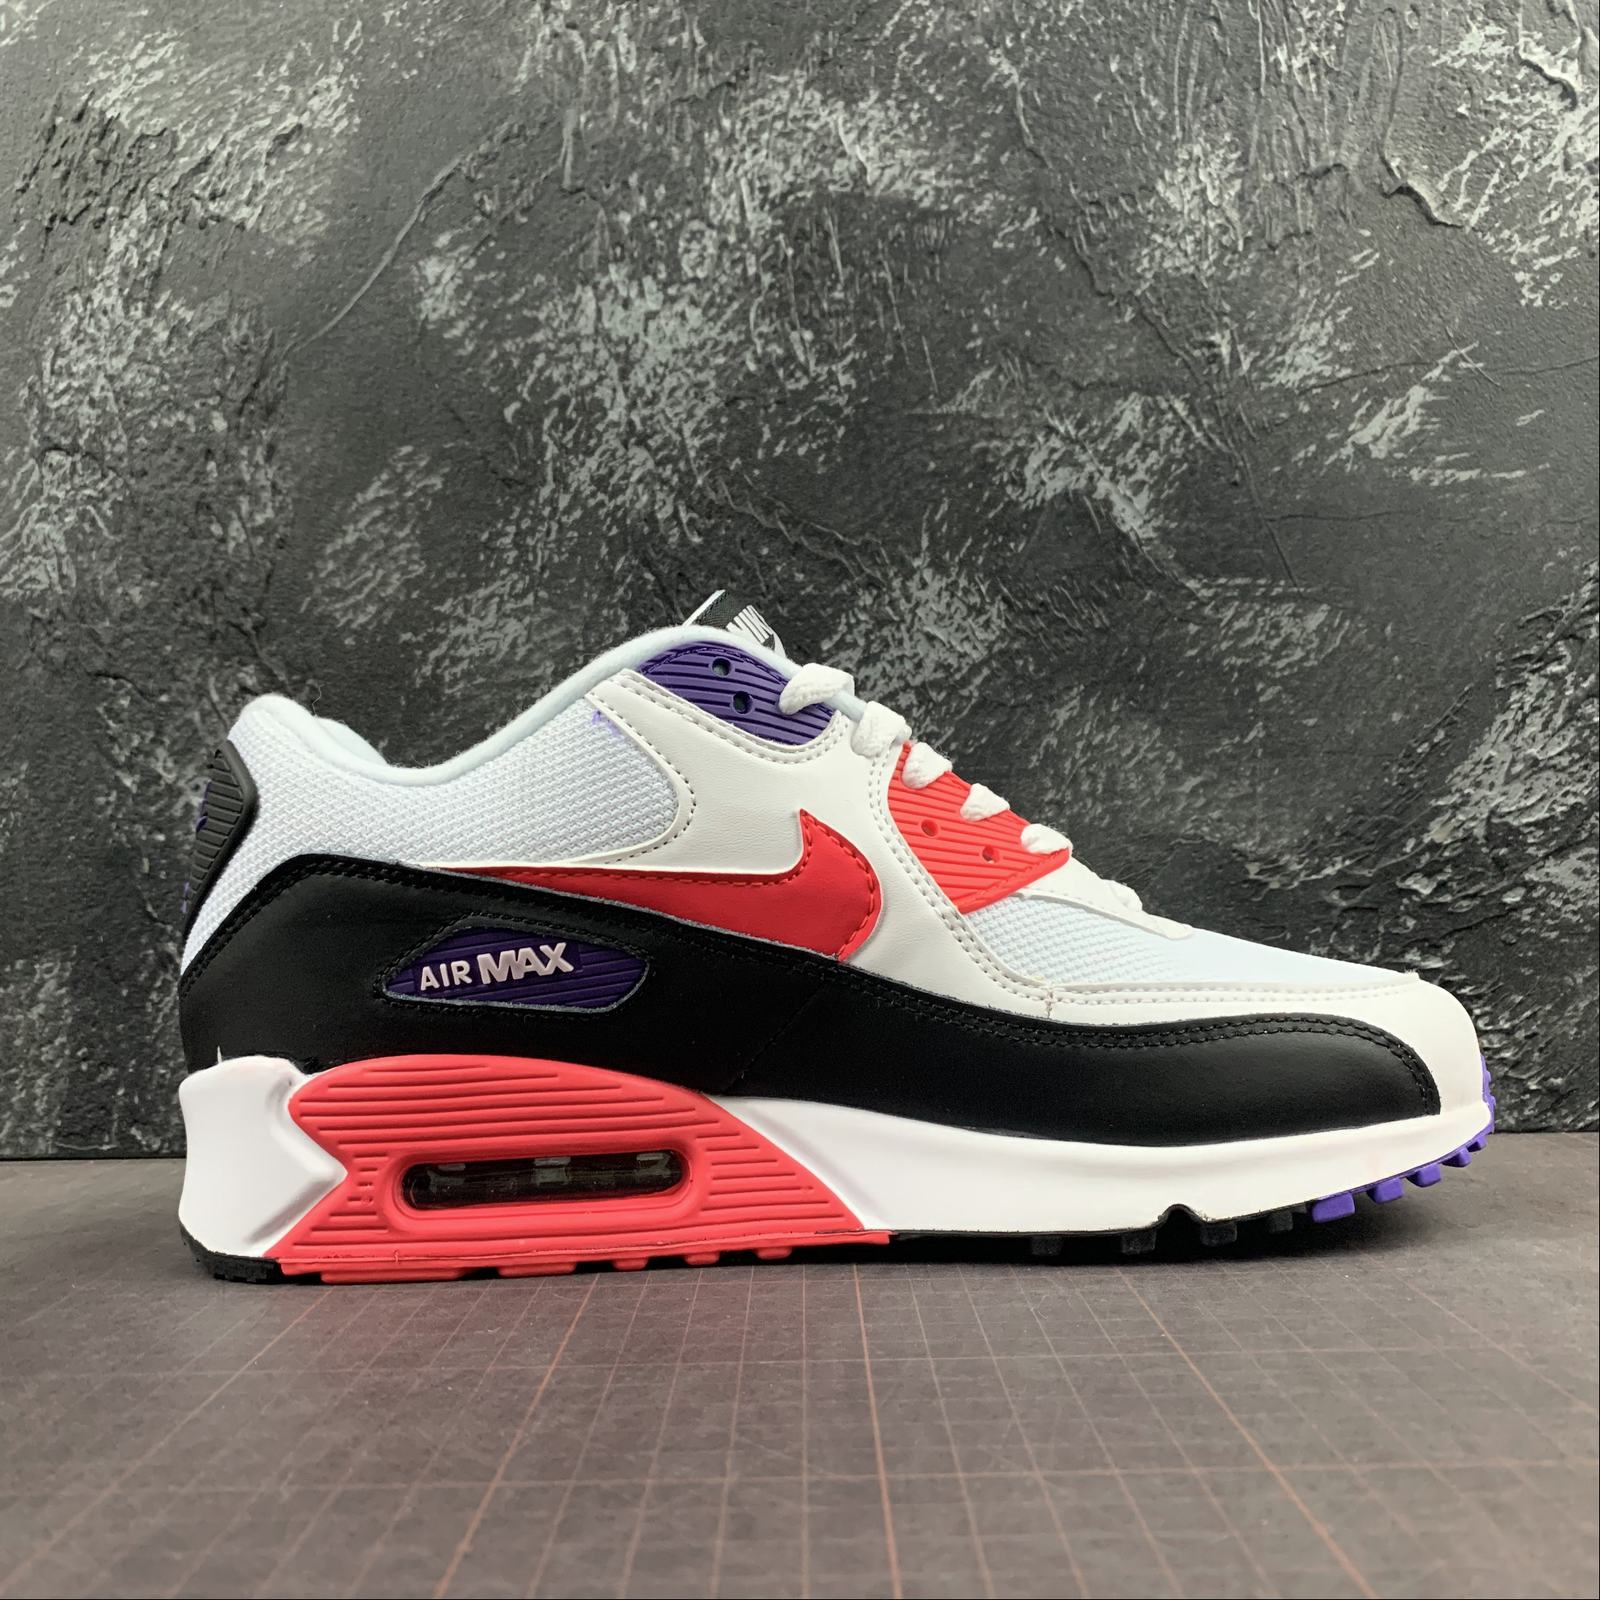 red and purple air max